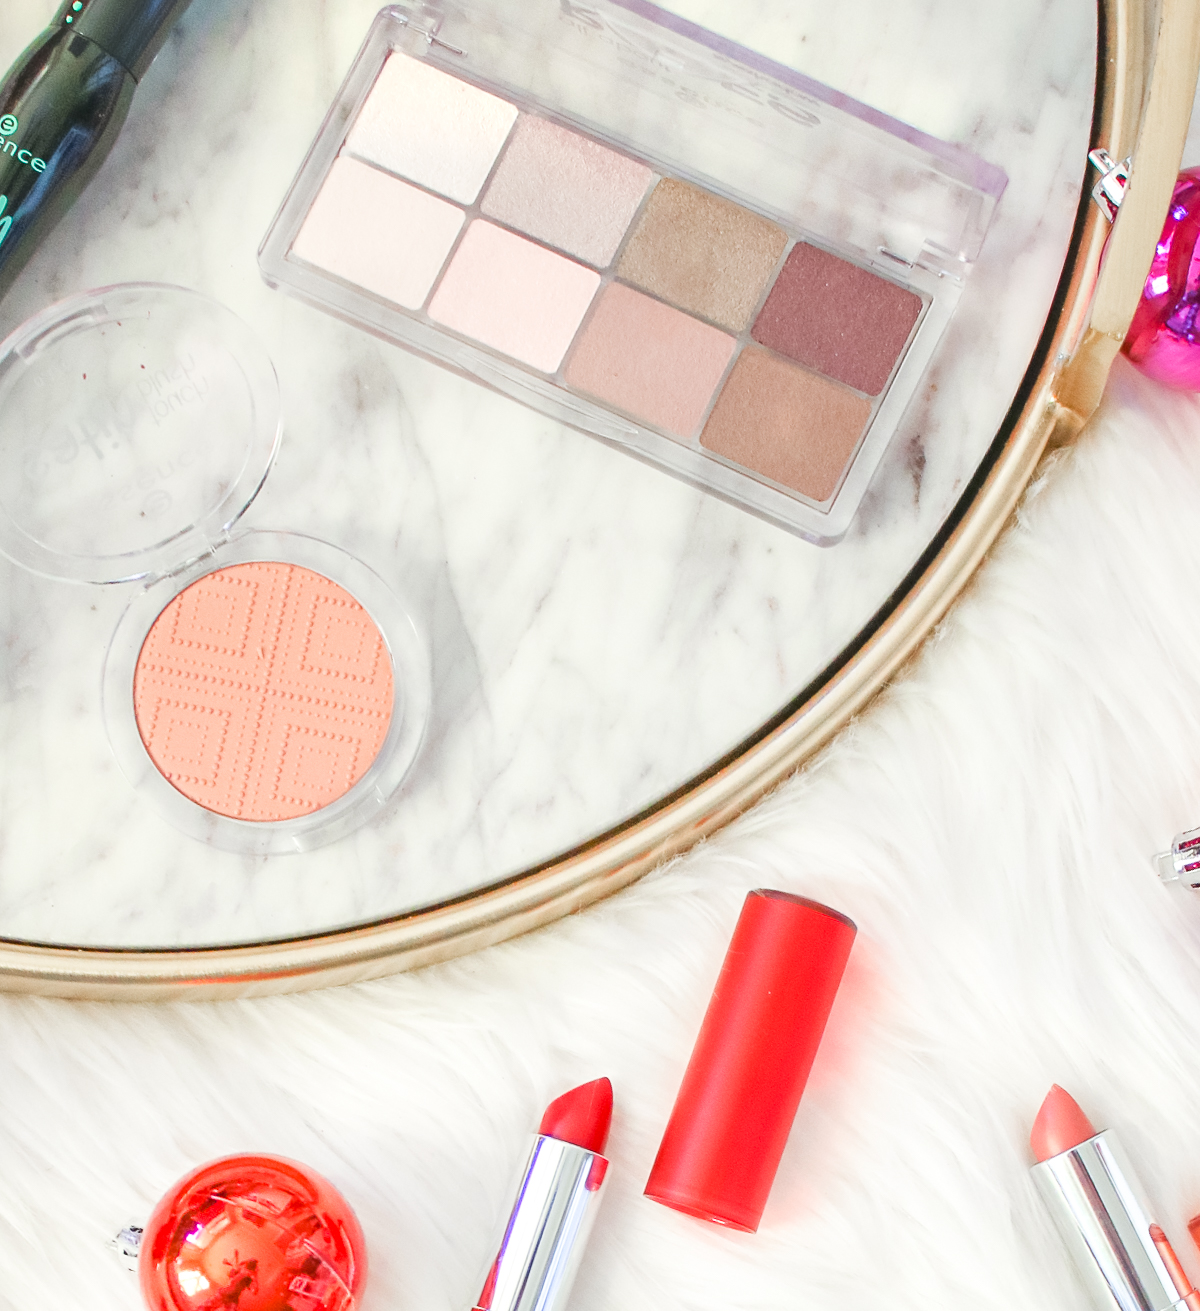 The best affordable but good quality makeup from essence cosmetics (including the best lipstick under $5) by southern fashion blogger Stephanie Ziajka from Diary of a Debutante